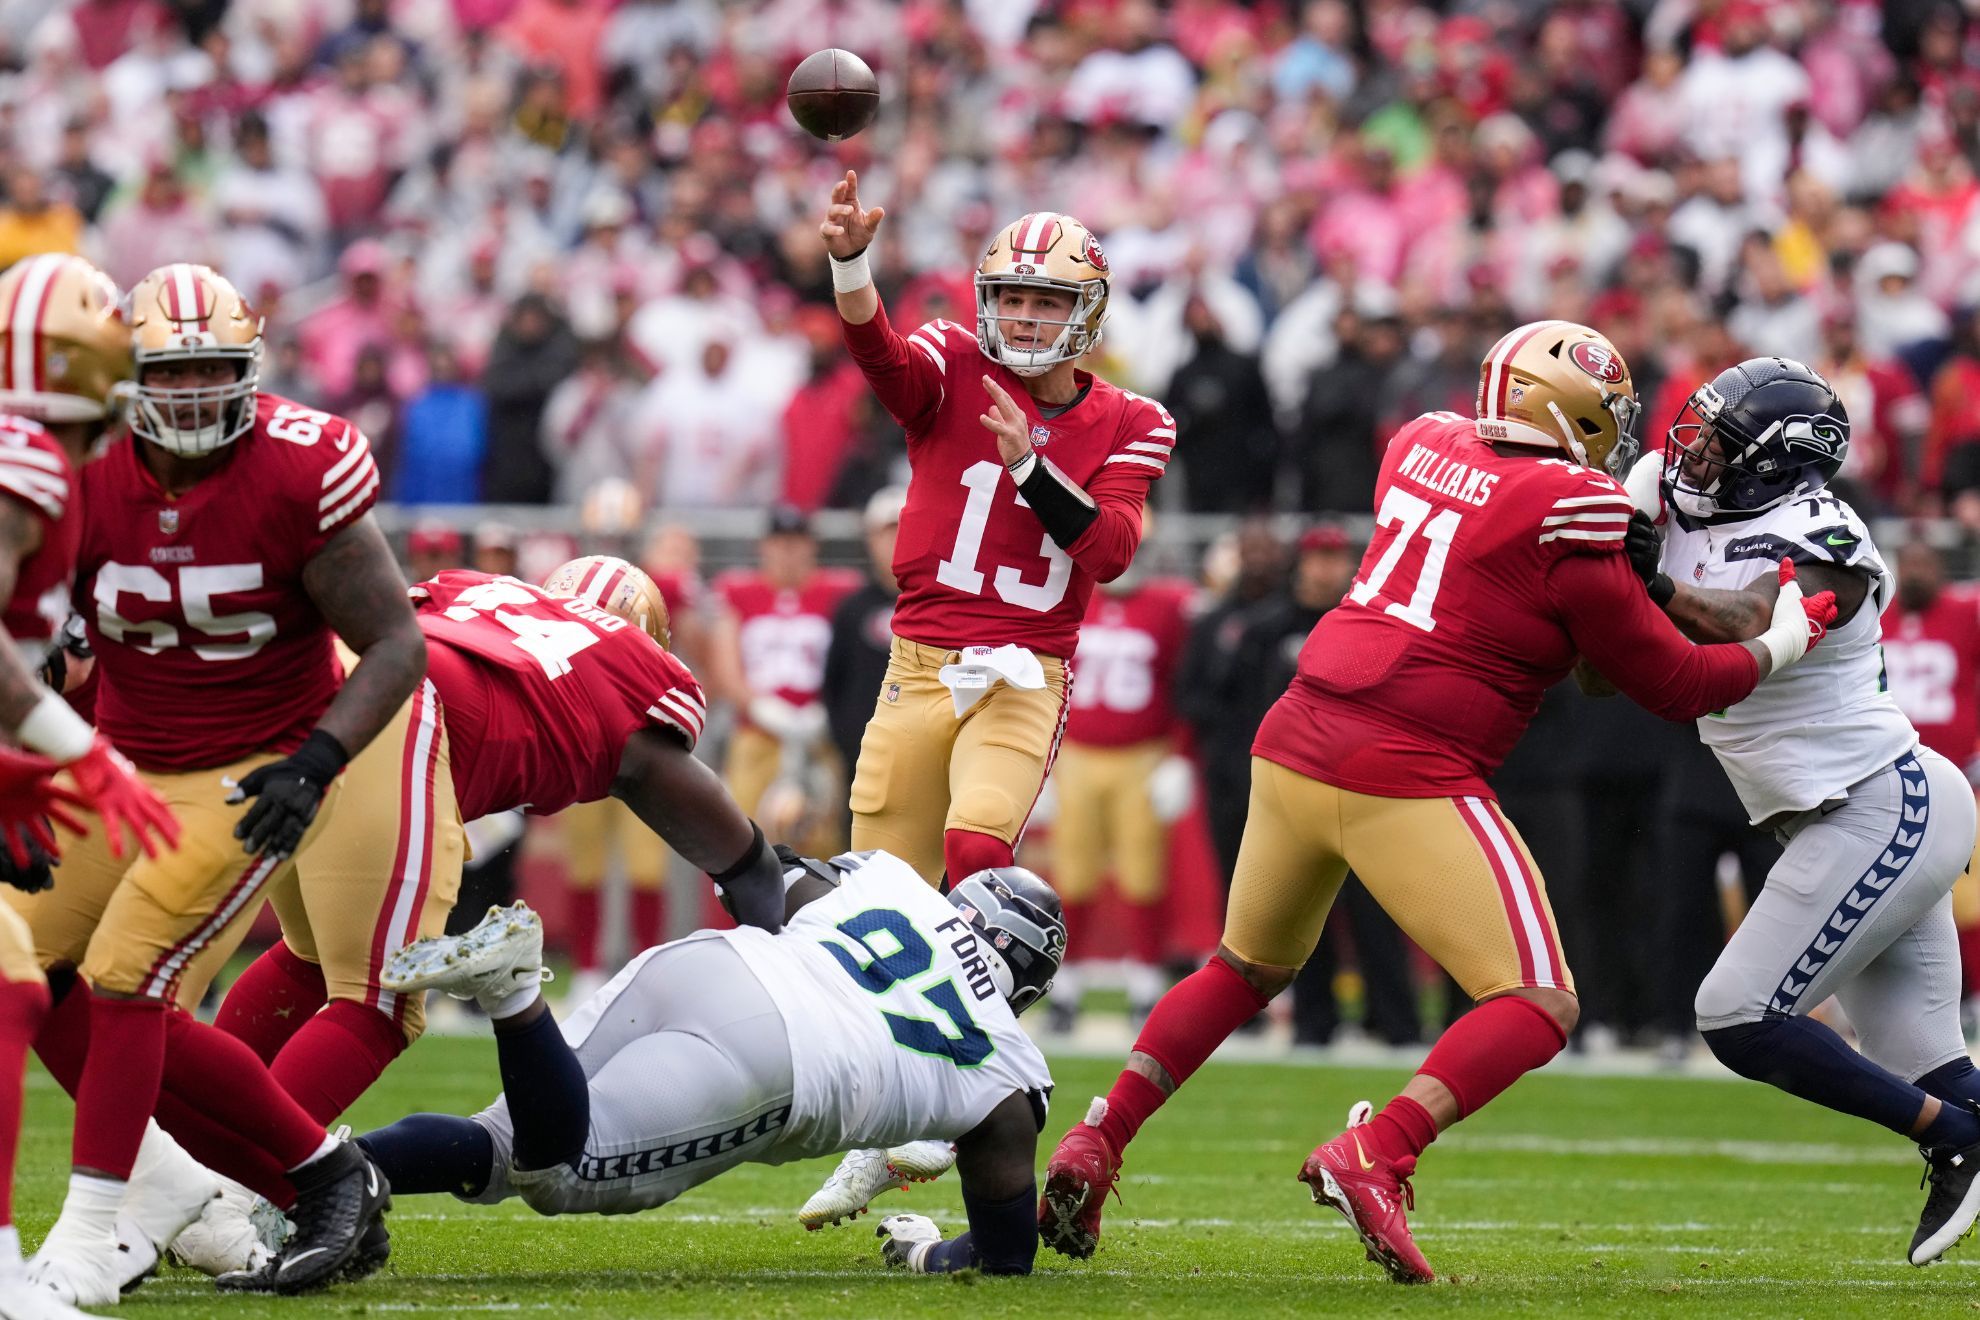 Seattle Seahawks at San Francisco 49ers